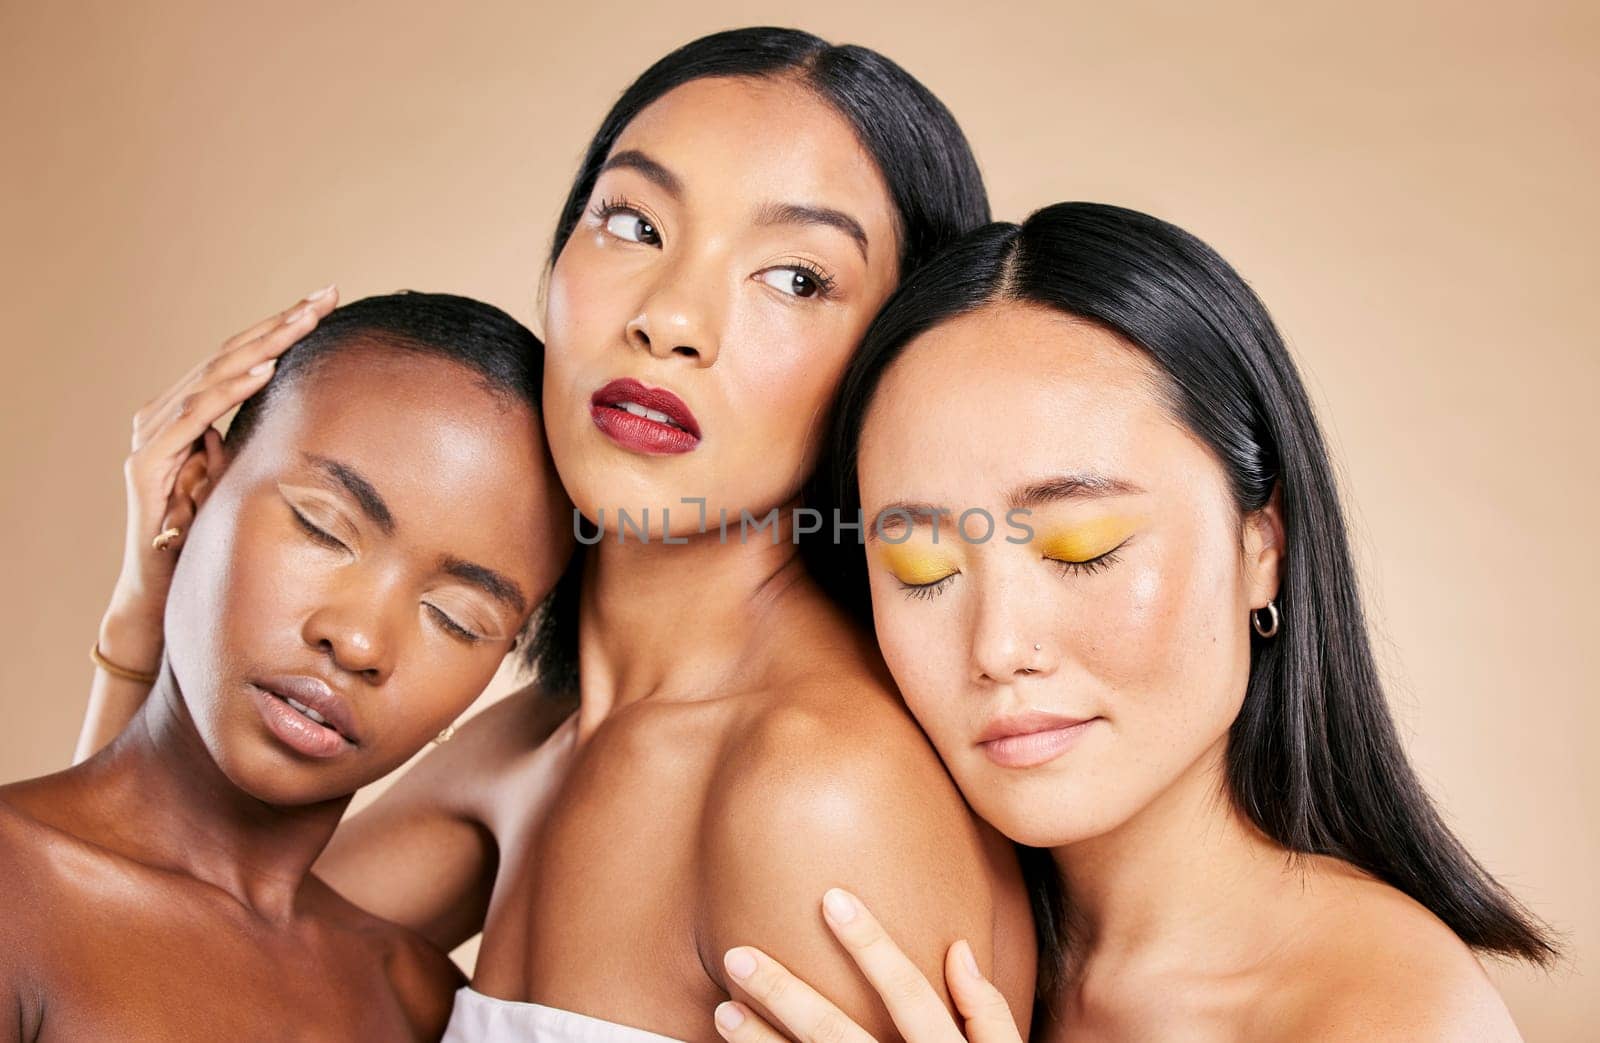 Women support, makeup and face dermatology for skincare wellness, cosmetics beauty and closed eyes in brown background studio. Young model, diversity and luxury spa treatment for natural glowing skin by YuriArcurs